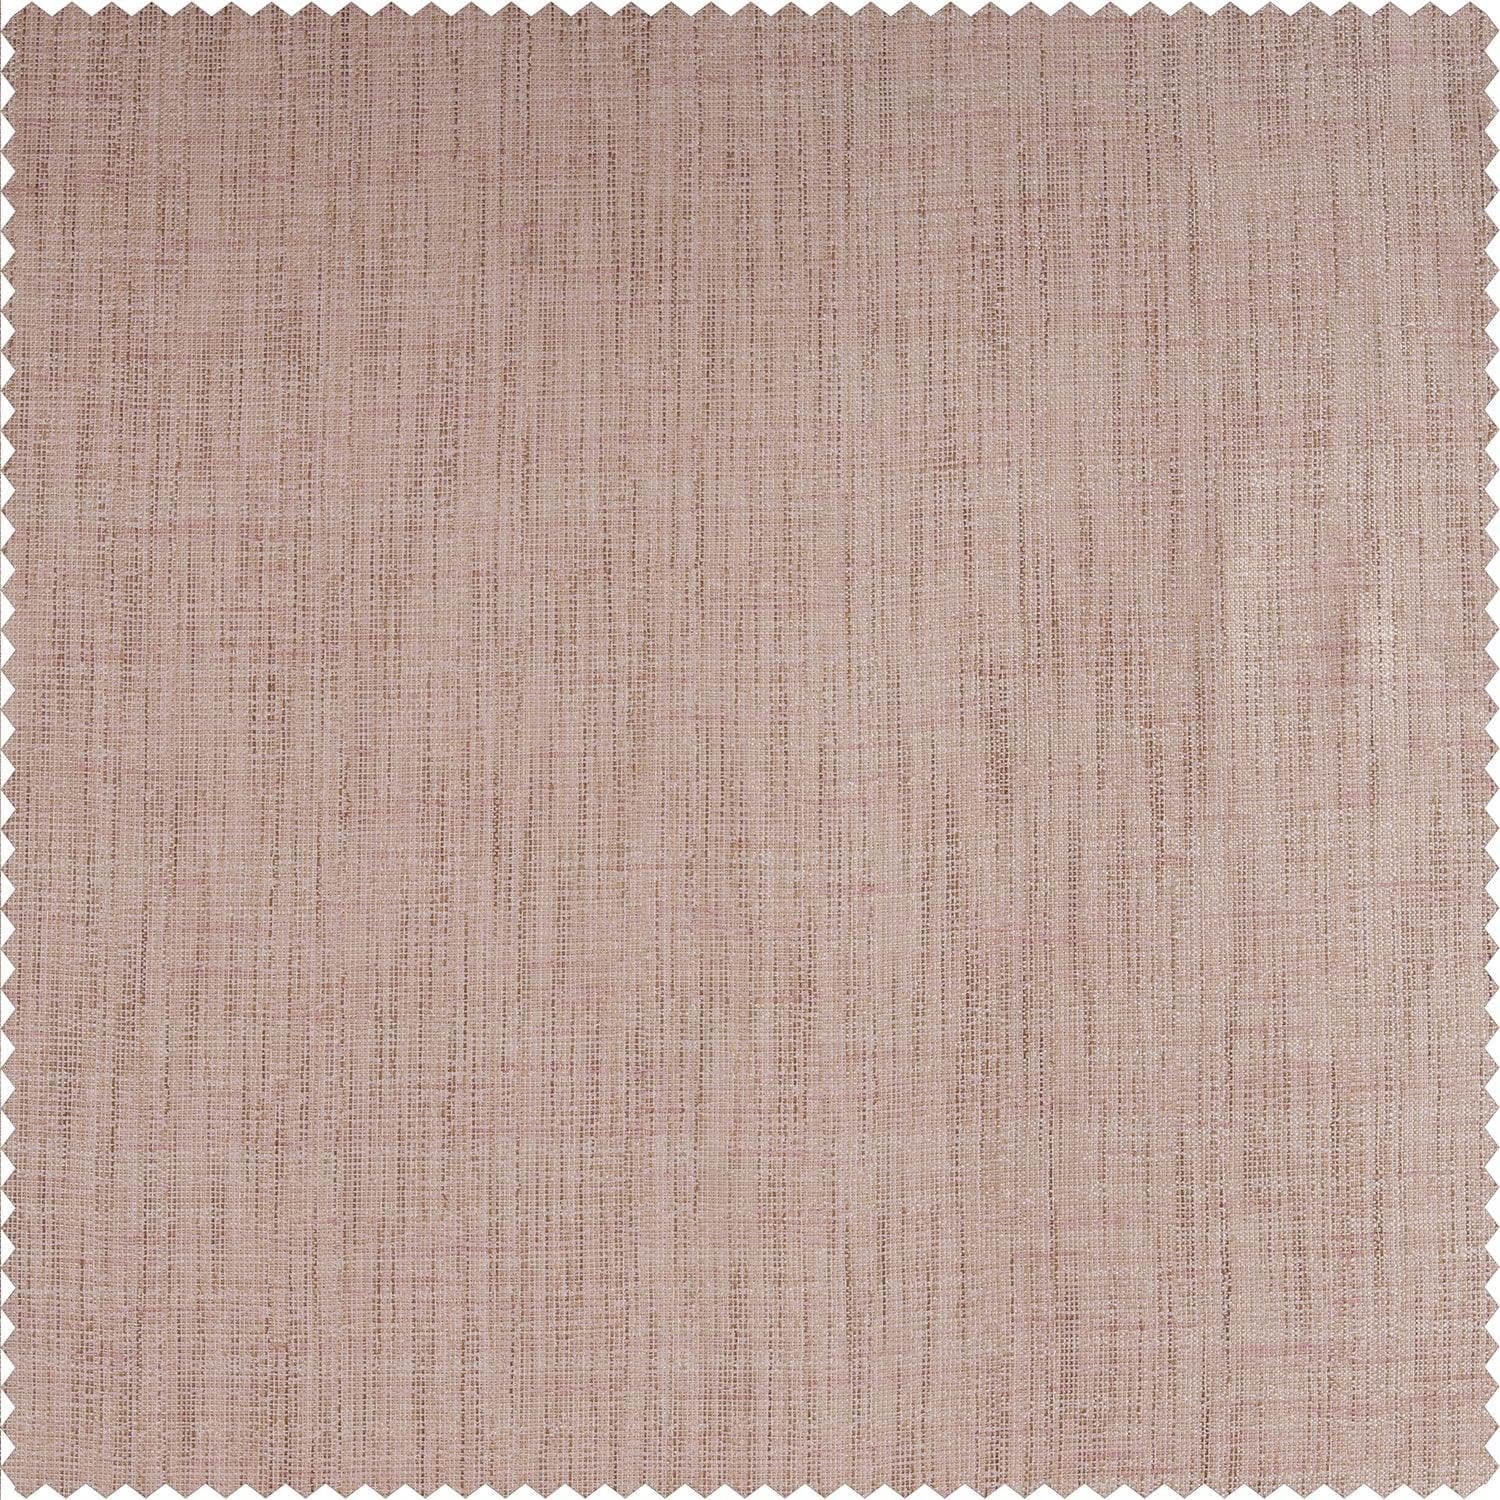 Rosey Pink Textured Faux Raw Silk Swatch